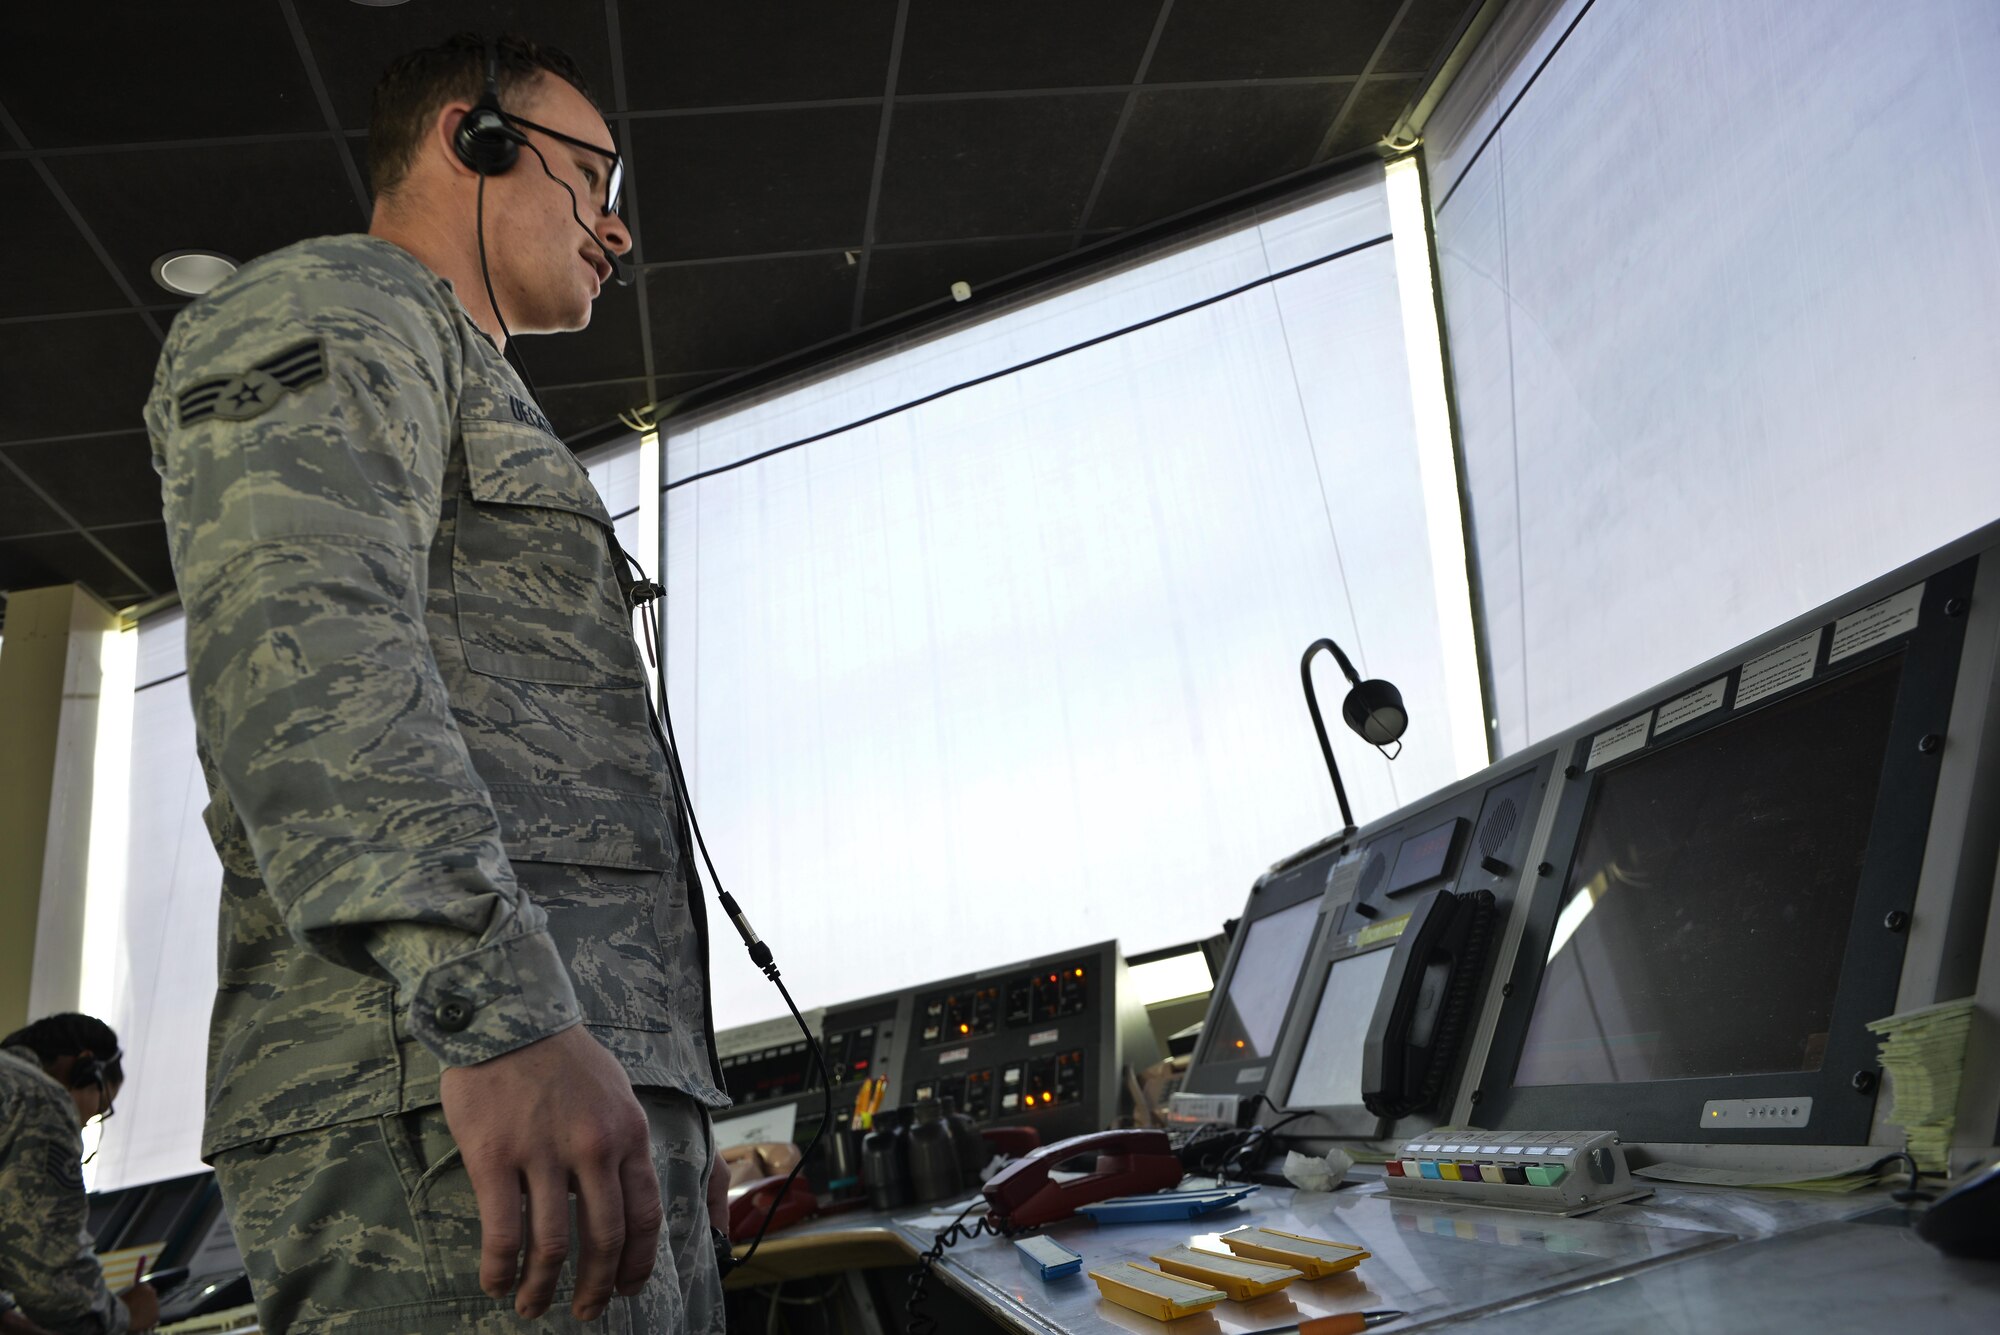 Senior Airman Deuey Uecker, 379th Expeditionary Operations Support Squadron air traffic controller, informs aircrew aboard a C-130J Super Hercules on parking procedures September 2, 2015 at Al Udeid Air Base, Qatar. U.S. Air Force air traffic controllers deployed to Al Udeid Air Base remain in constant contact with coalition aircraft departing and entering the base’s airspace while working side-by-side with Qatari military ATC. (U.S. Air Force photo/Staff Sgt. Alexandre Montes)